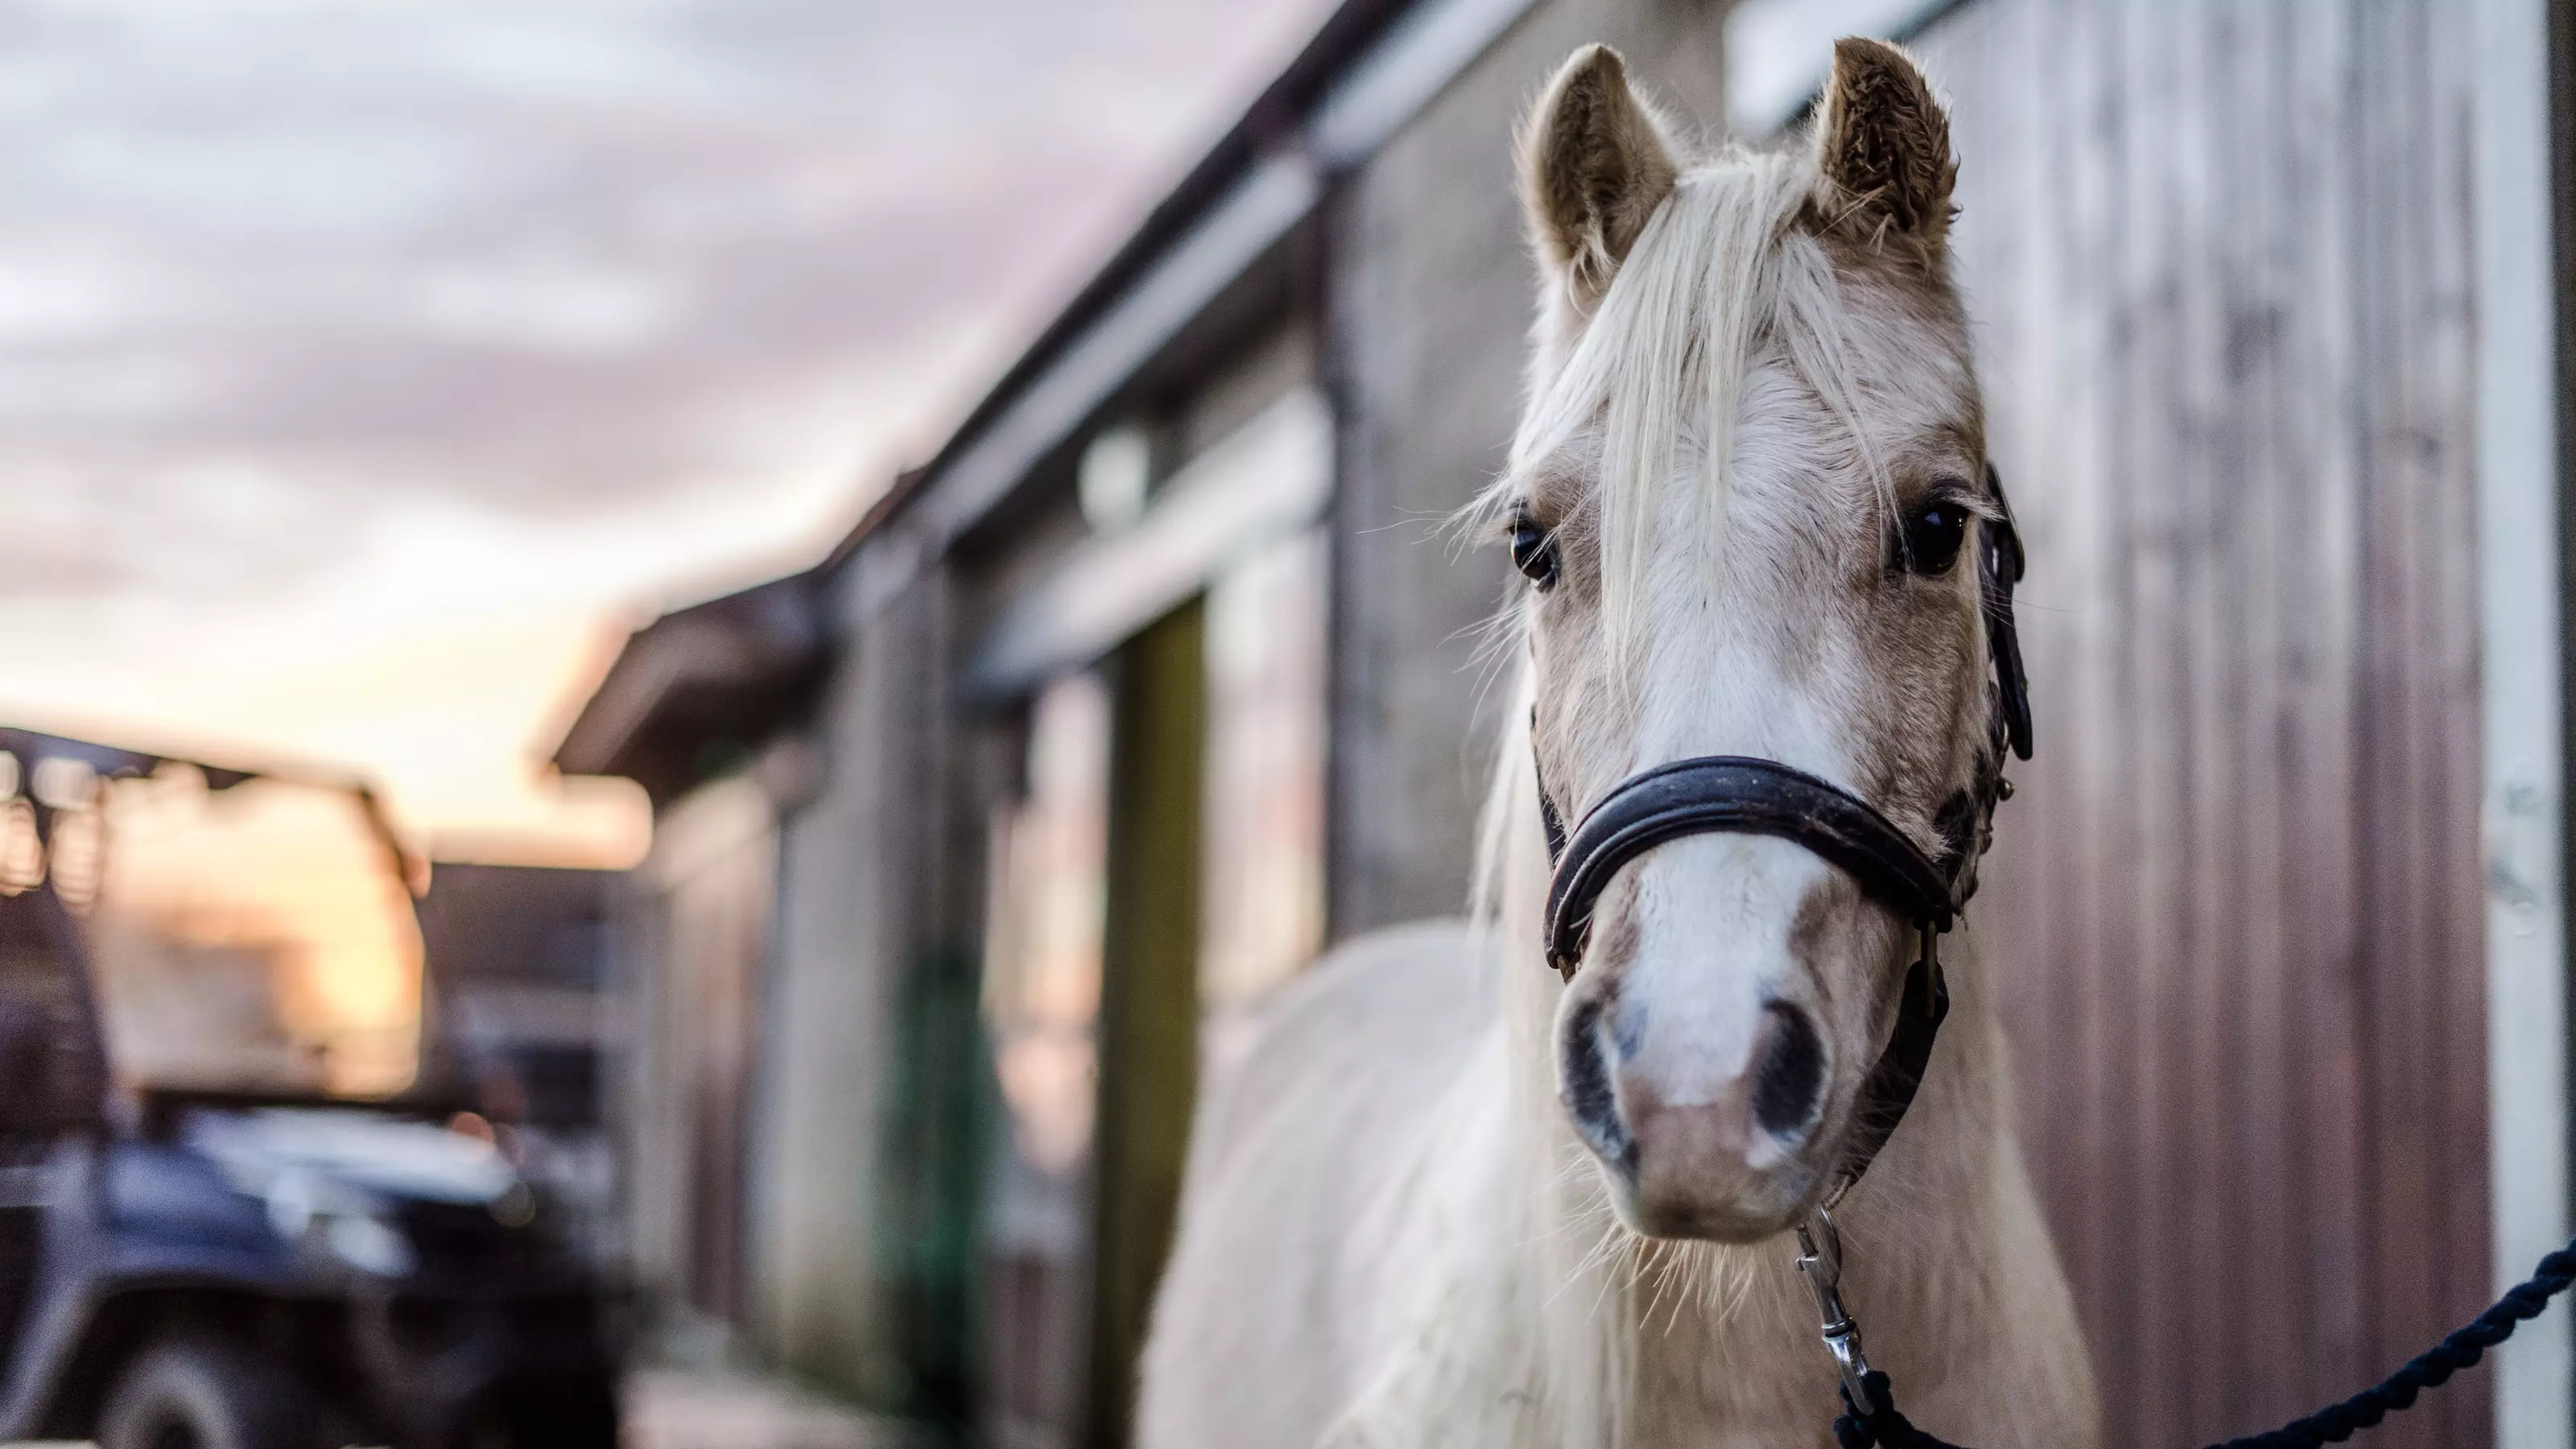 Pony Tizzy at Burford rehoming centre